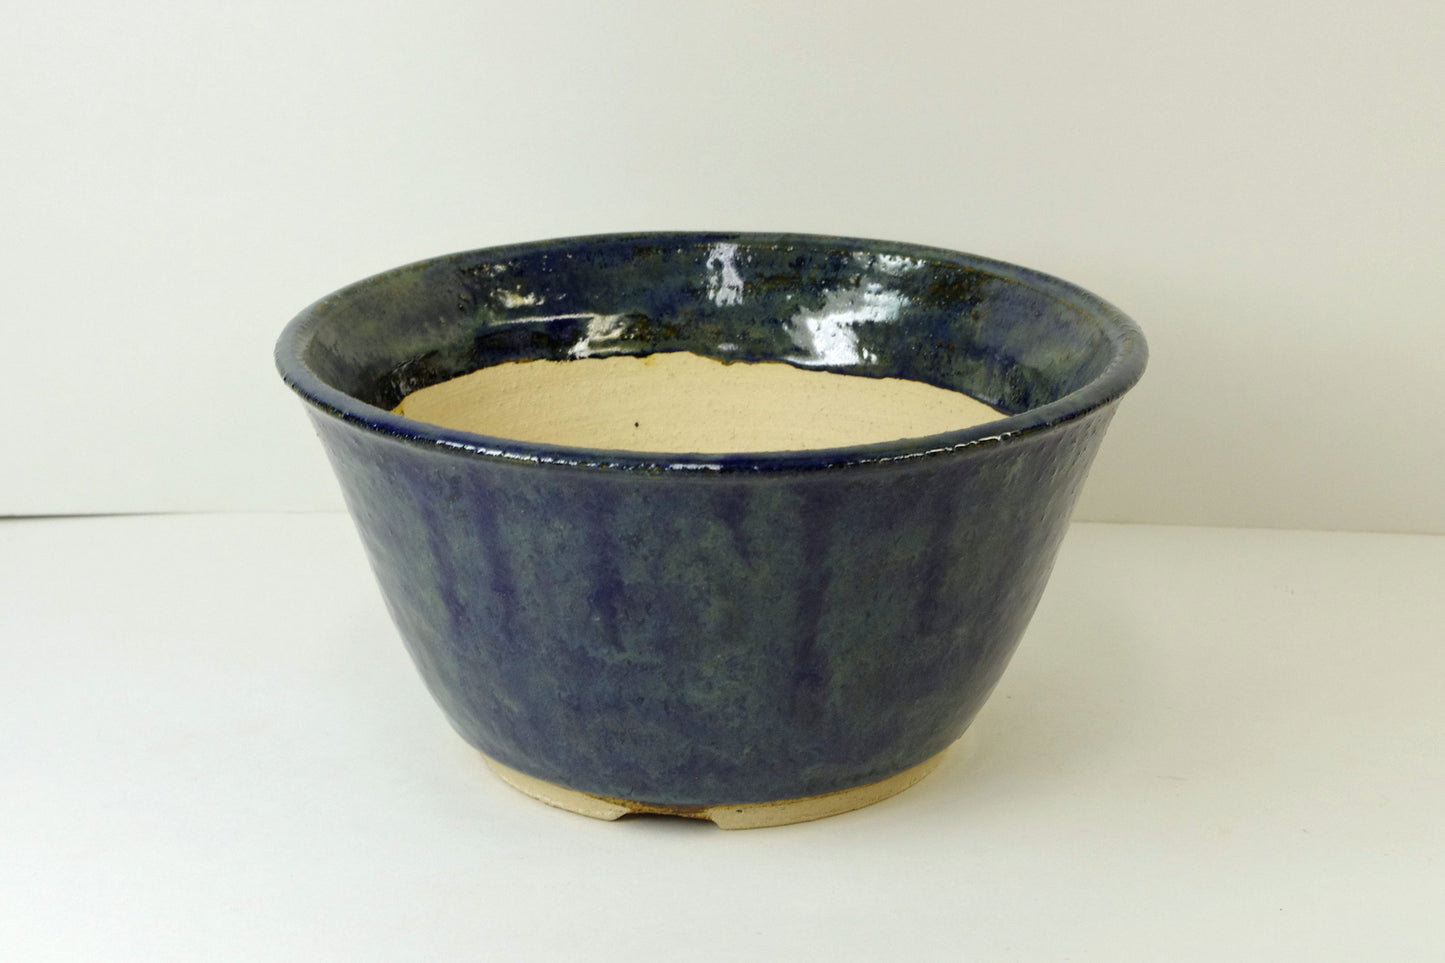 2100, Hand Thrown Stoneware Bonsai Pot, Extra Wire Holes, Blues, Browns, Greens  6 7/8 x 3 1/2